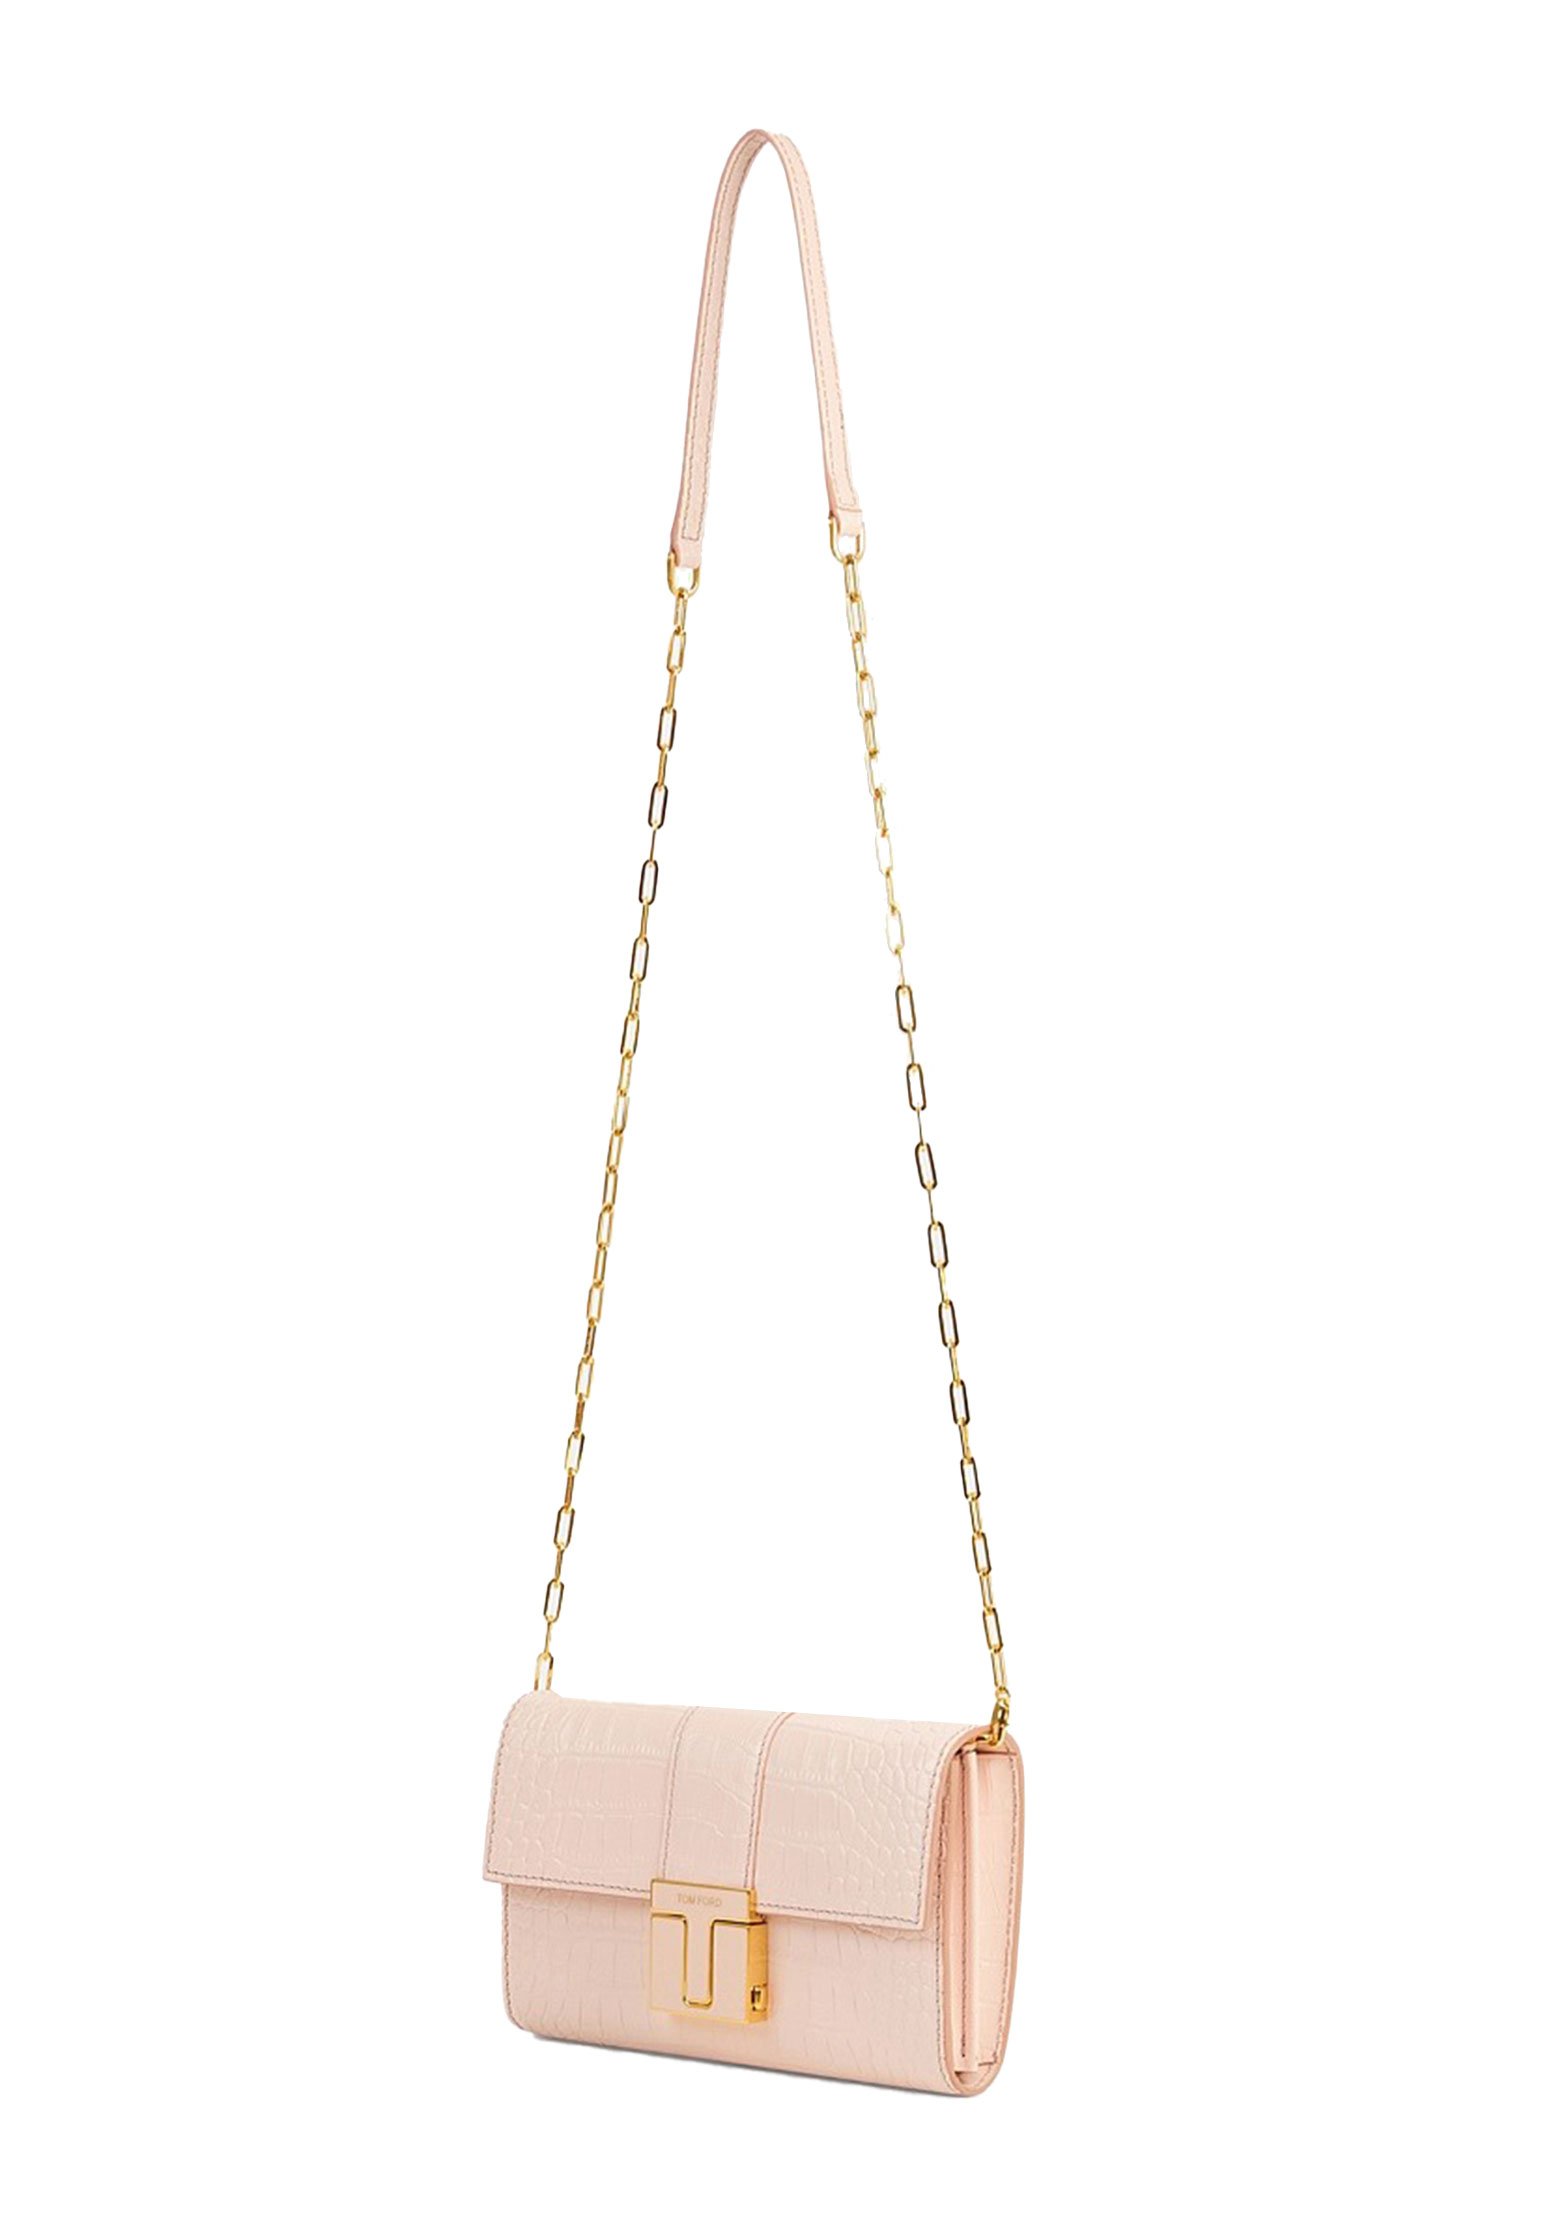 Bag TOM FORD Color: poudre (Code: 1944) in online store Allure